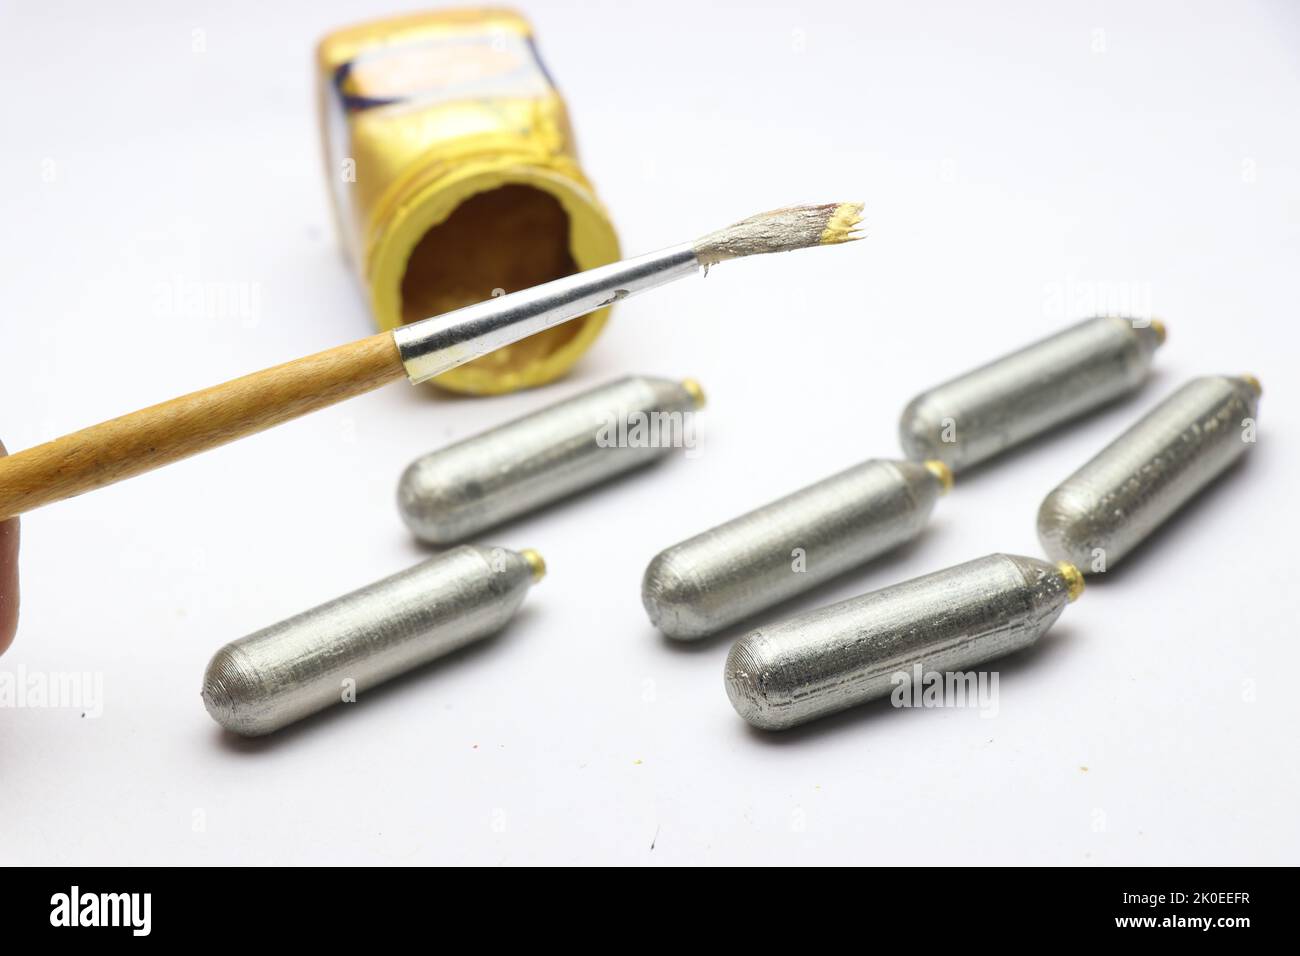 Art and crafts work being done using a paint brush and silver color paint on some cylindrical shape object Stock Photo